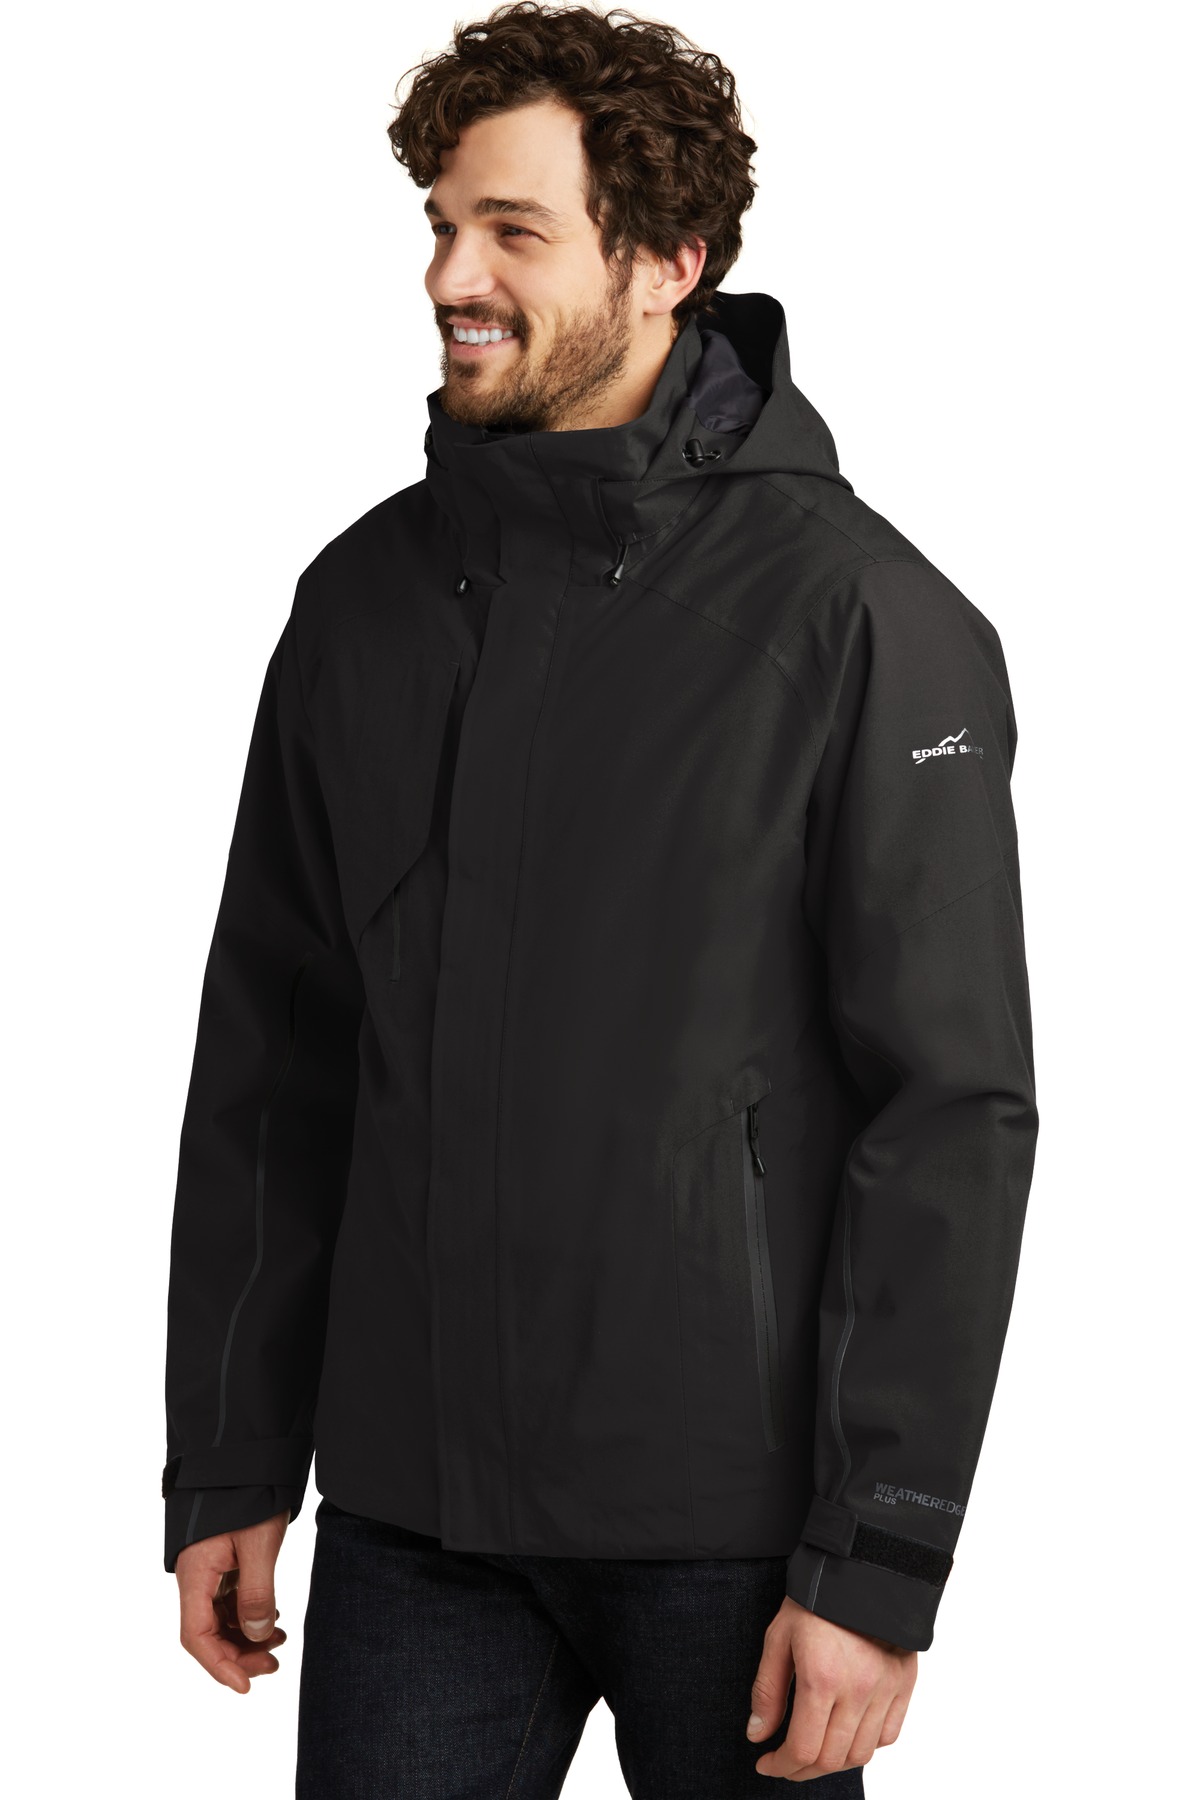 Eddie Bauer WeatherEdge Plus Insulated Jacket. EB554 | Blank Apparel by ...